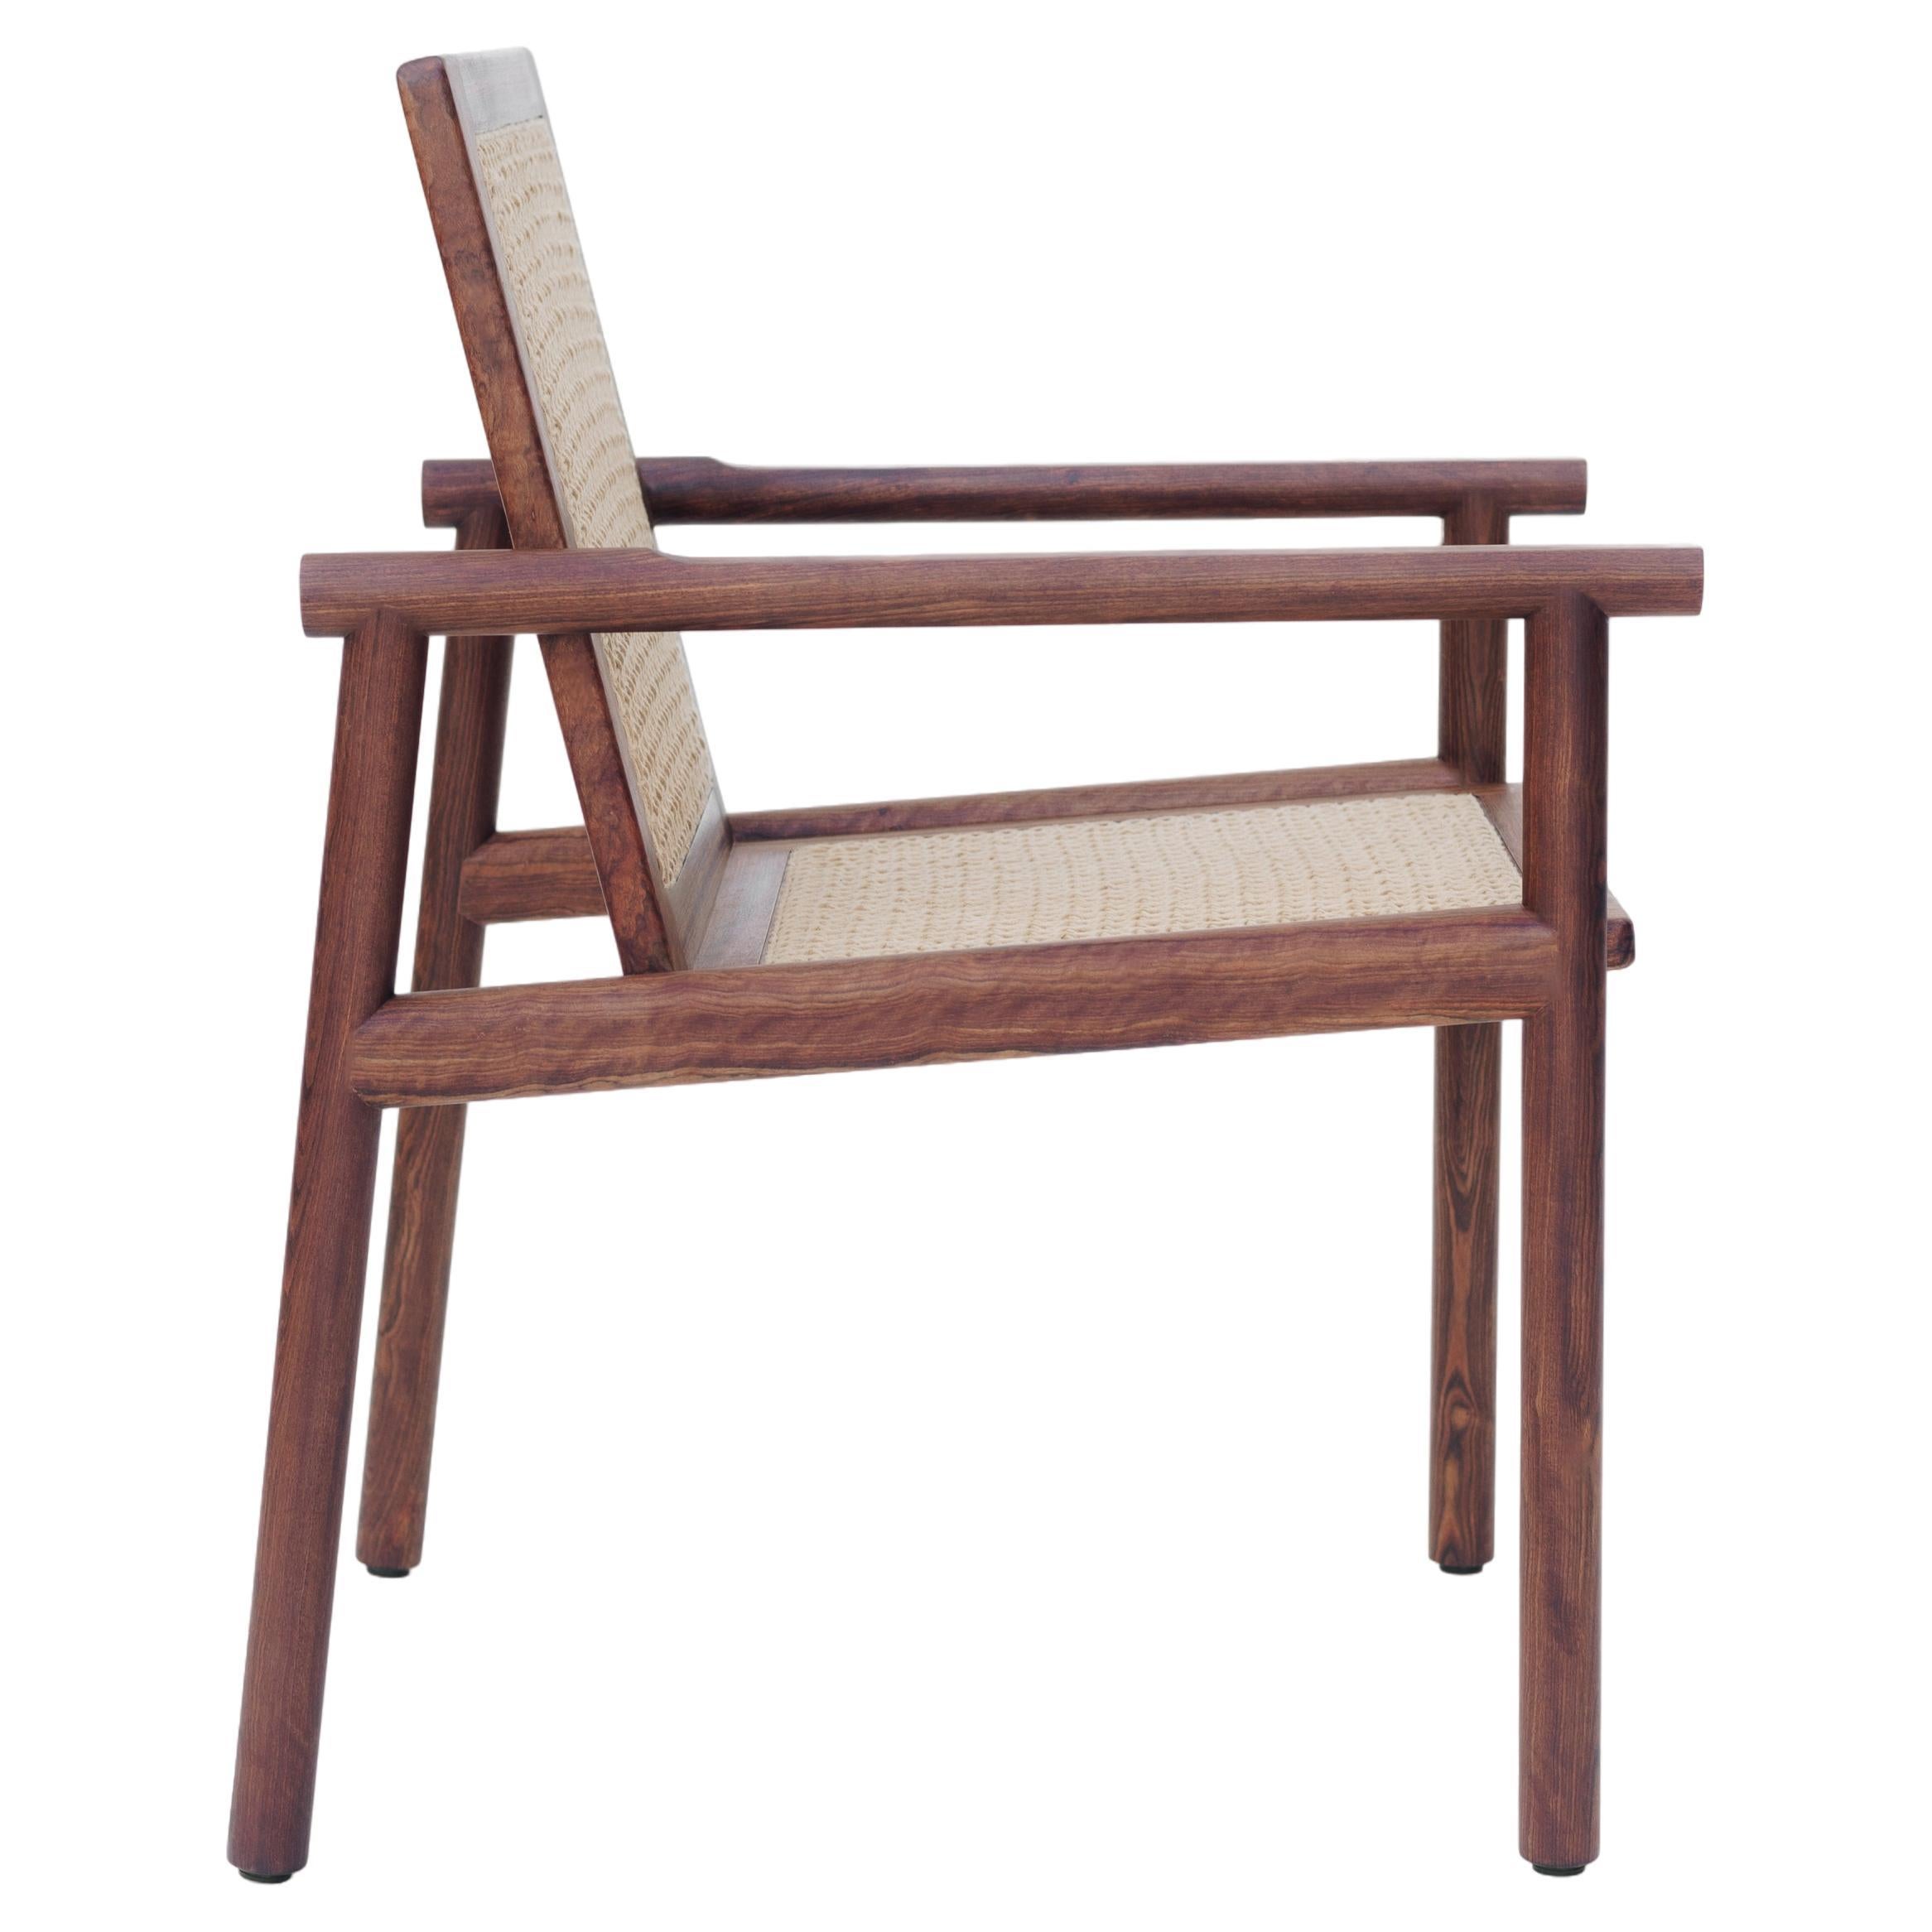 Hand-Woven Contemporary Chair in Caribbean Walnut